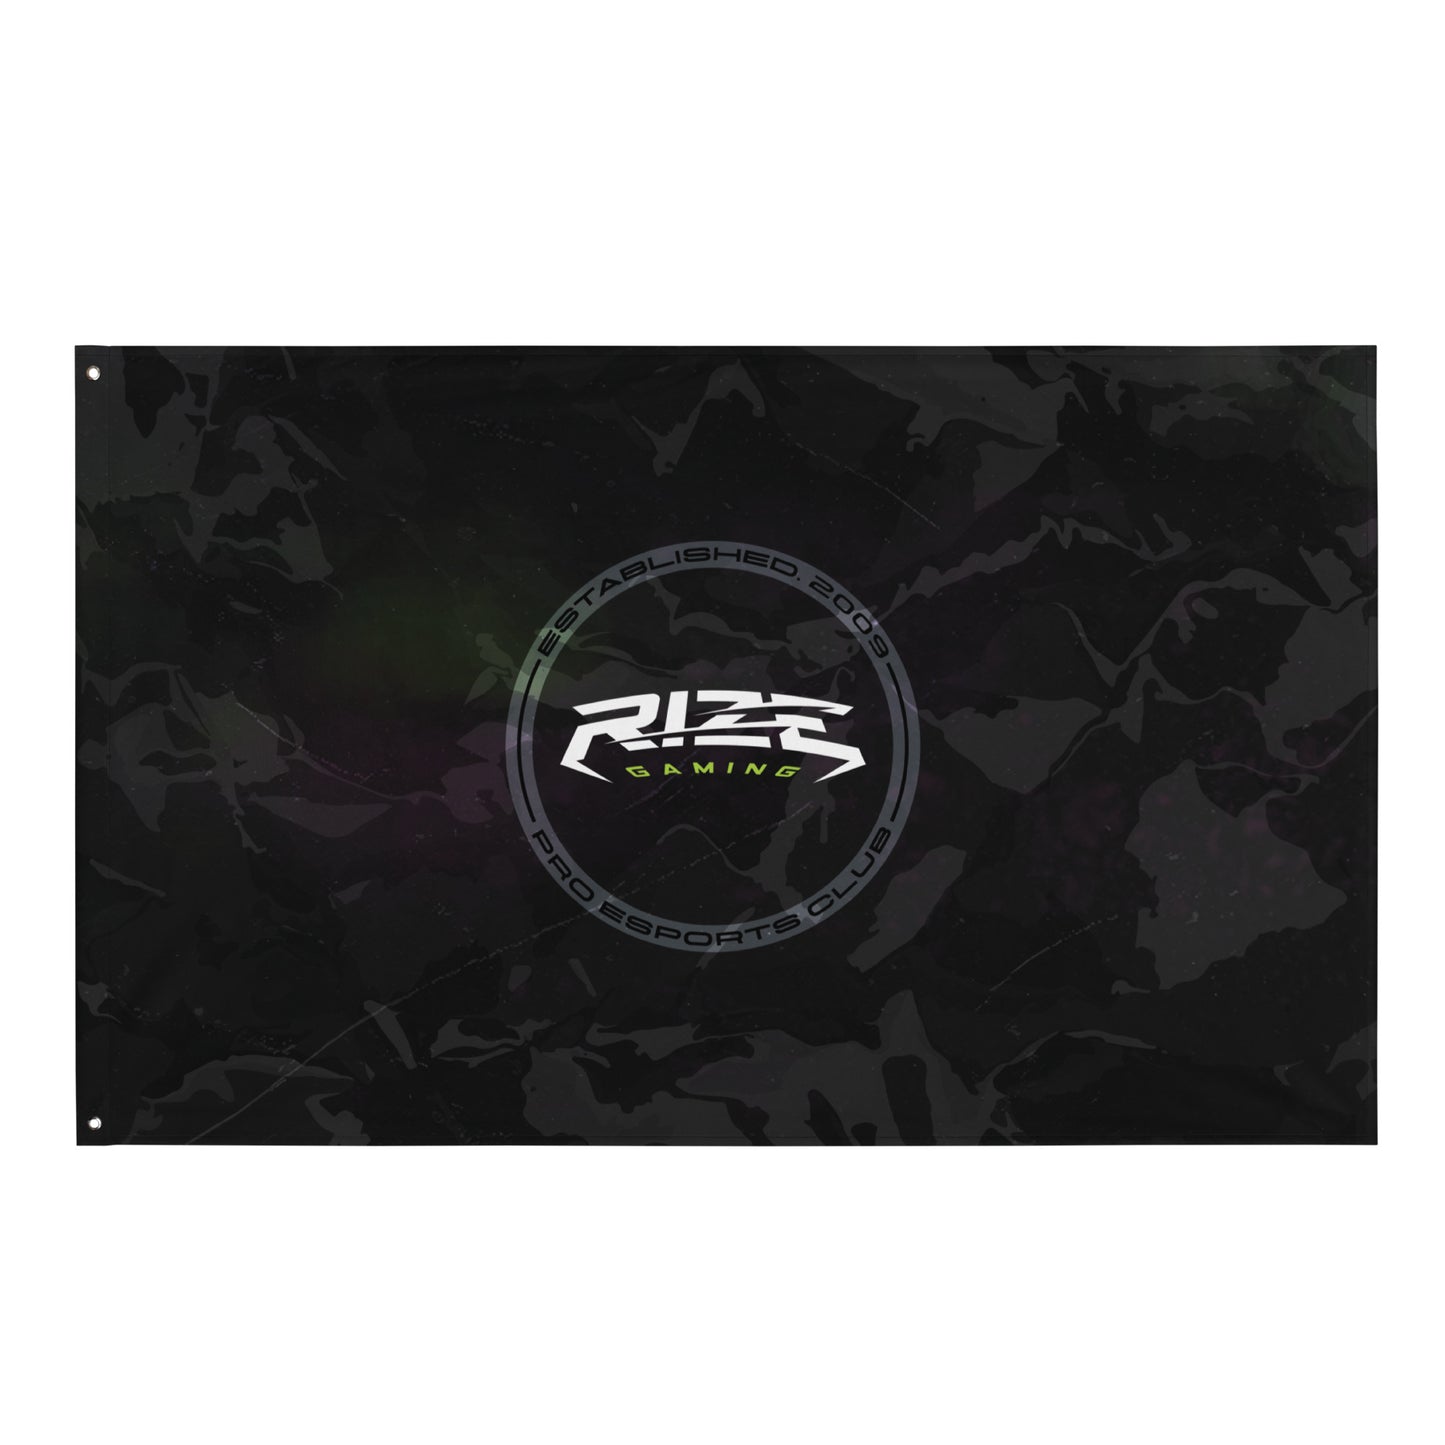 RIZE SUPPORTERS FLAG